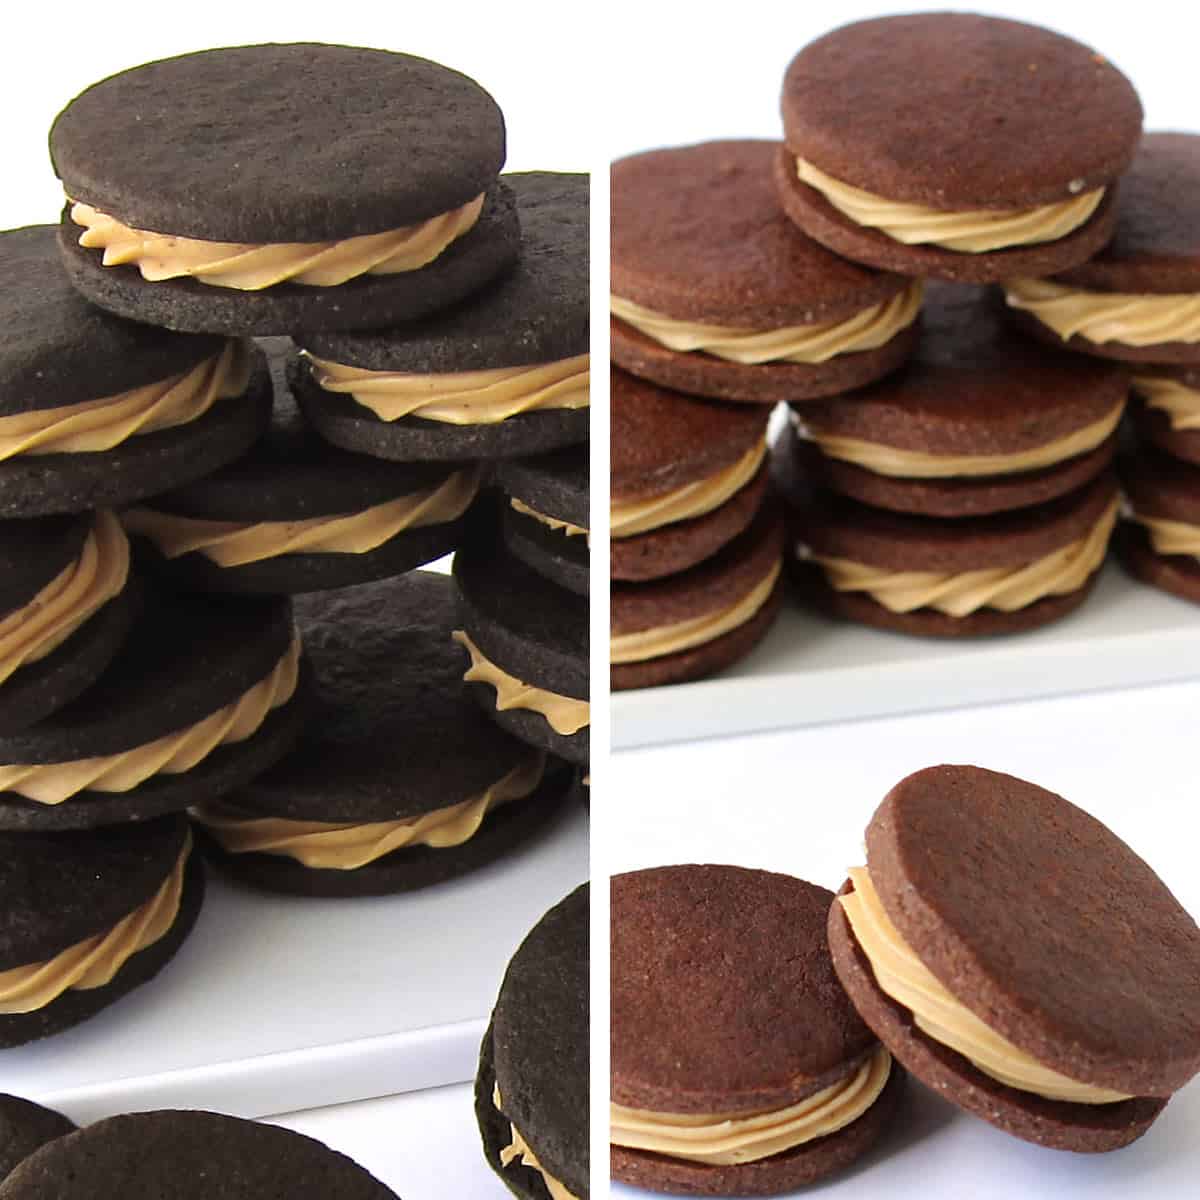 Chocolate sandwich cookies made using two different cocoa powders to create black cookies and brown cookies.